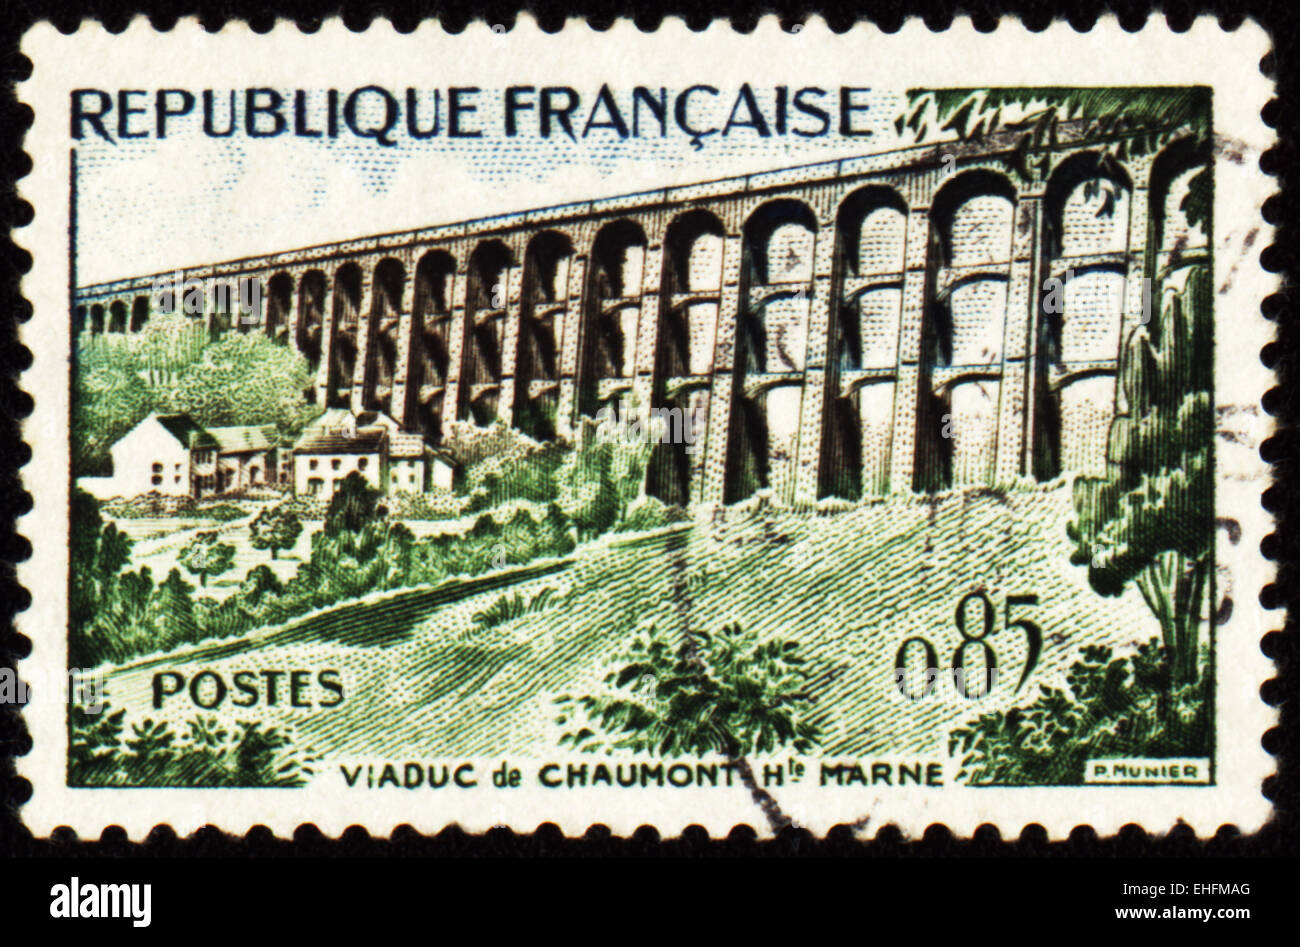 FRANCE - CIRCA 1960: A stamp printed in France shows Chaumont Viaduct Stock Photo